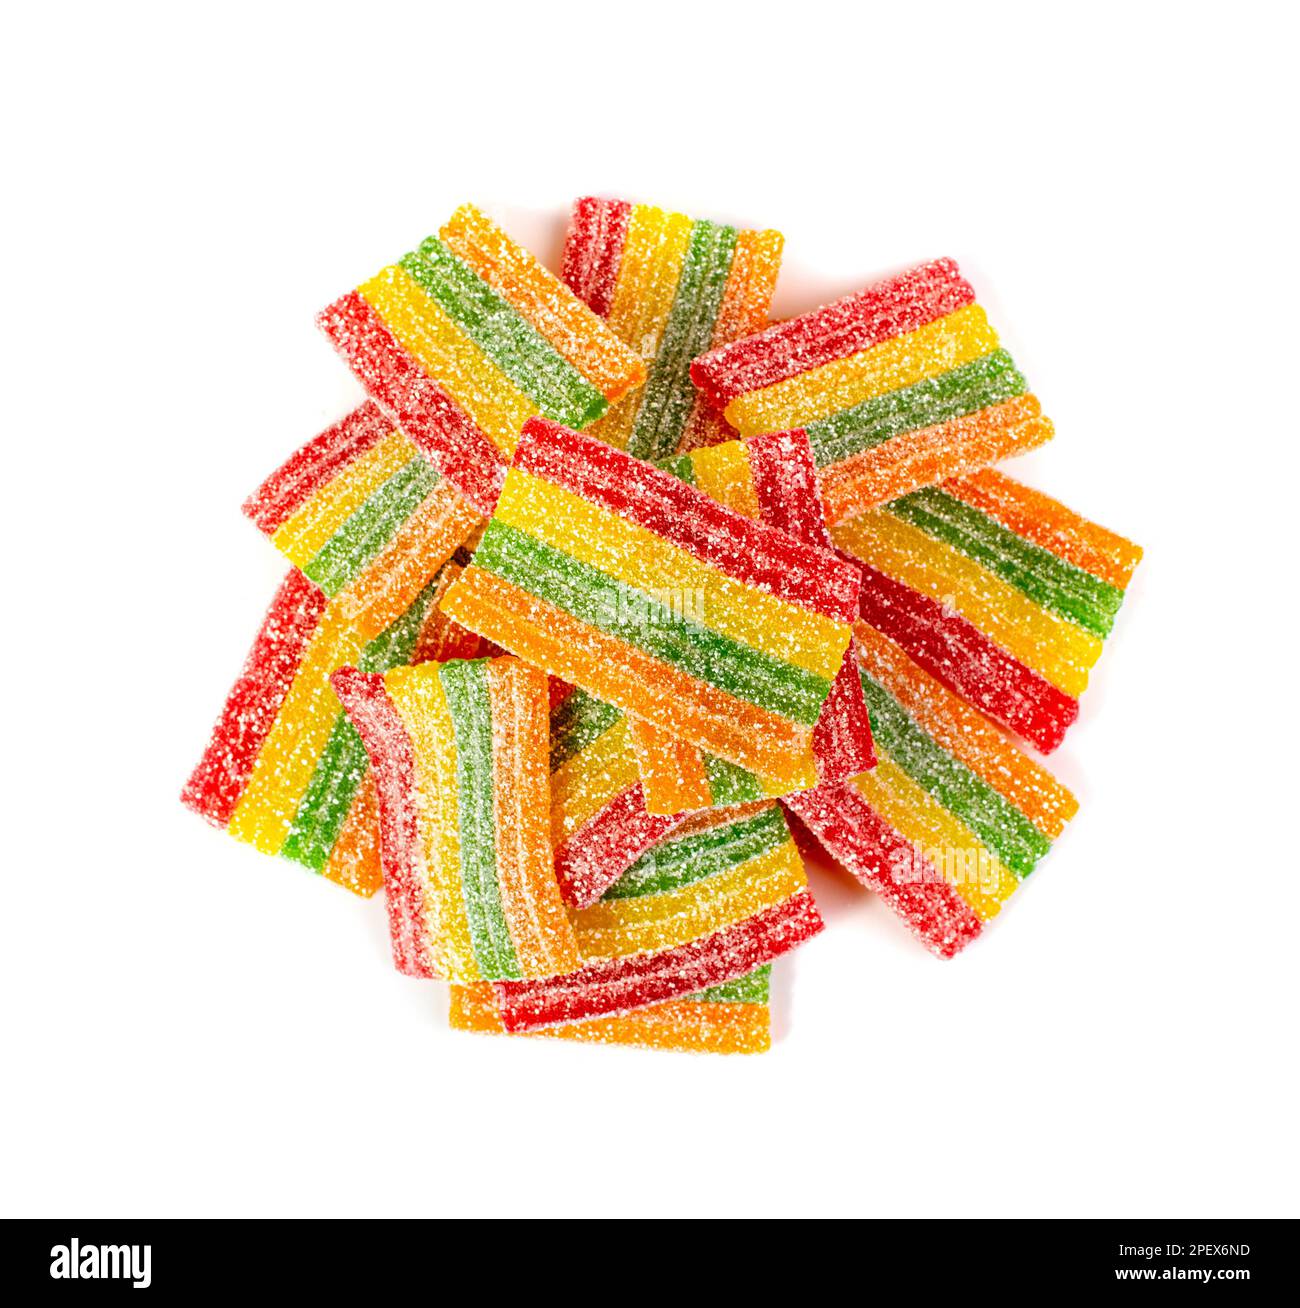 Sour Jelly Strips in Candy Shop. Colorful Chewing Marmalade for Background  Stock Photo - Image of gelatin, flexible: 152466888